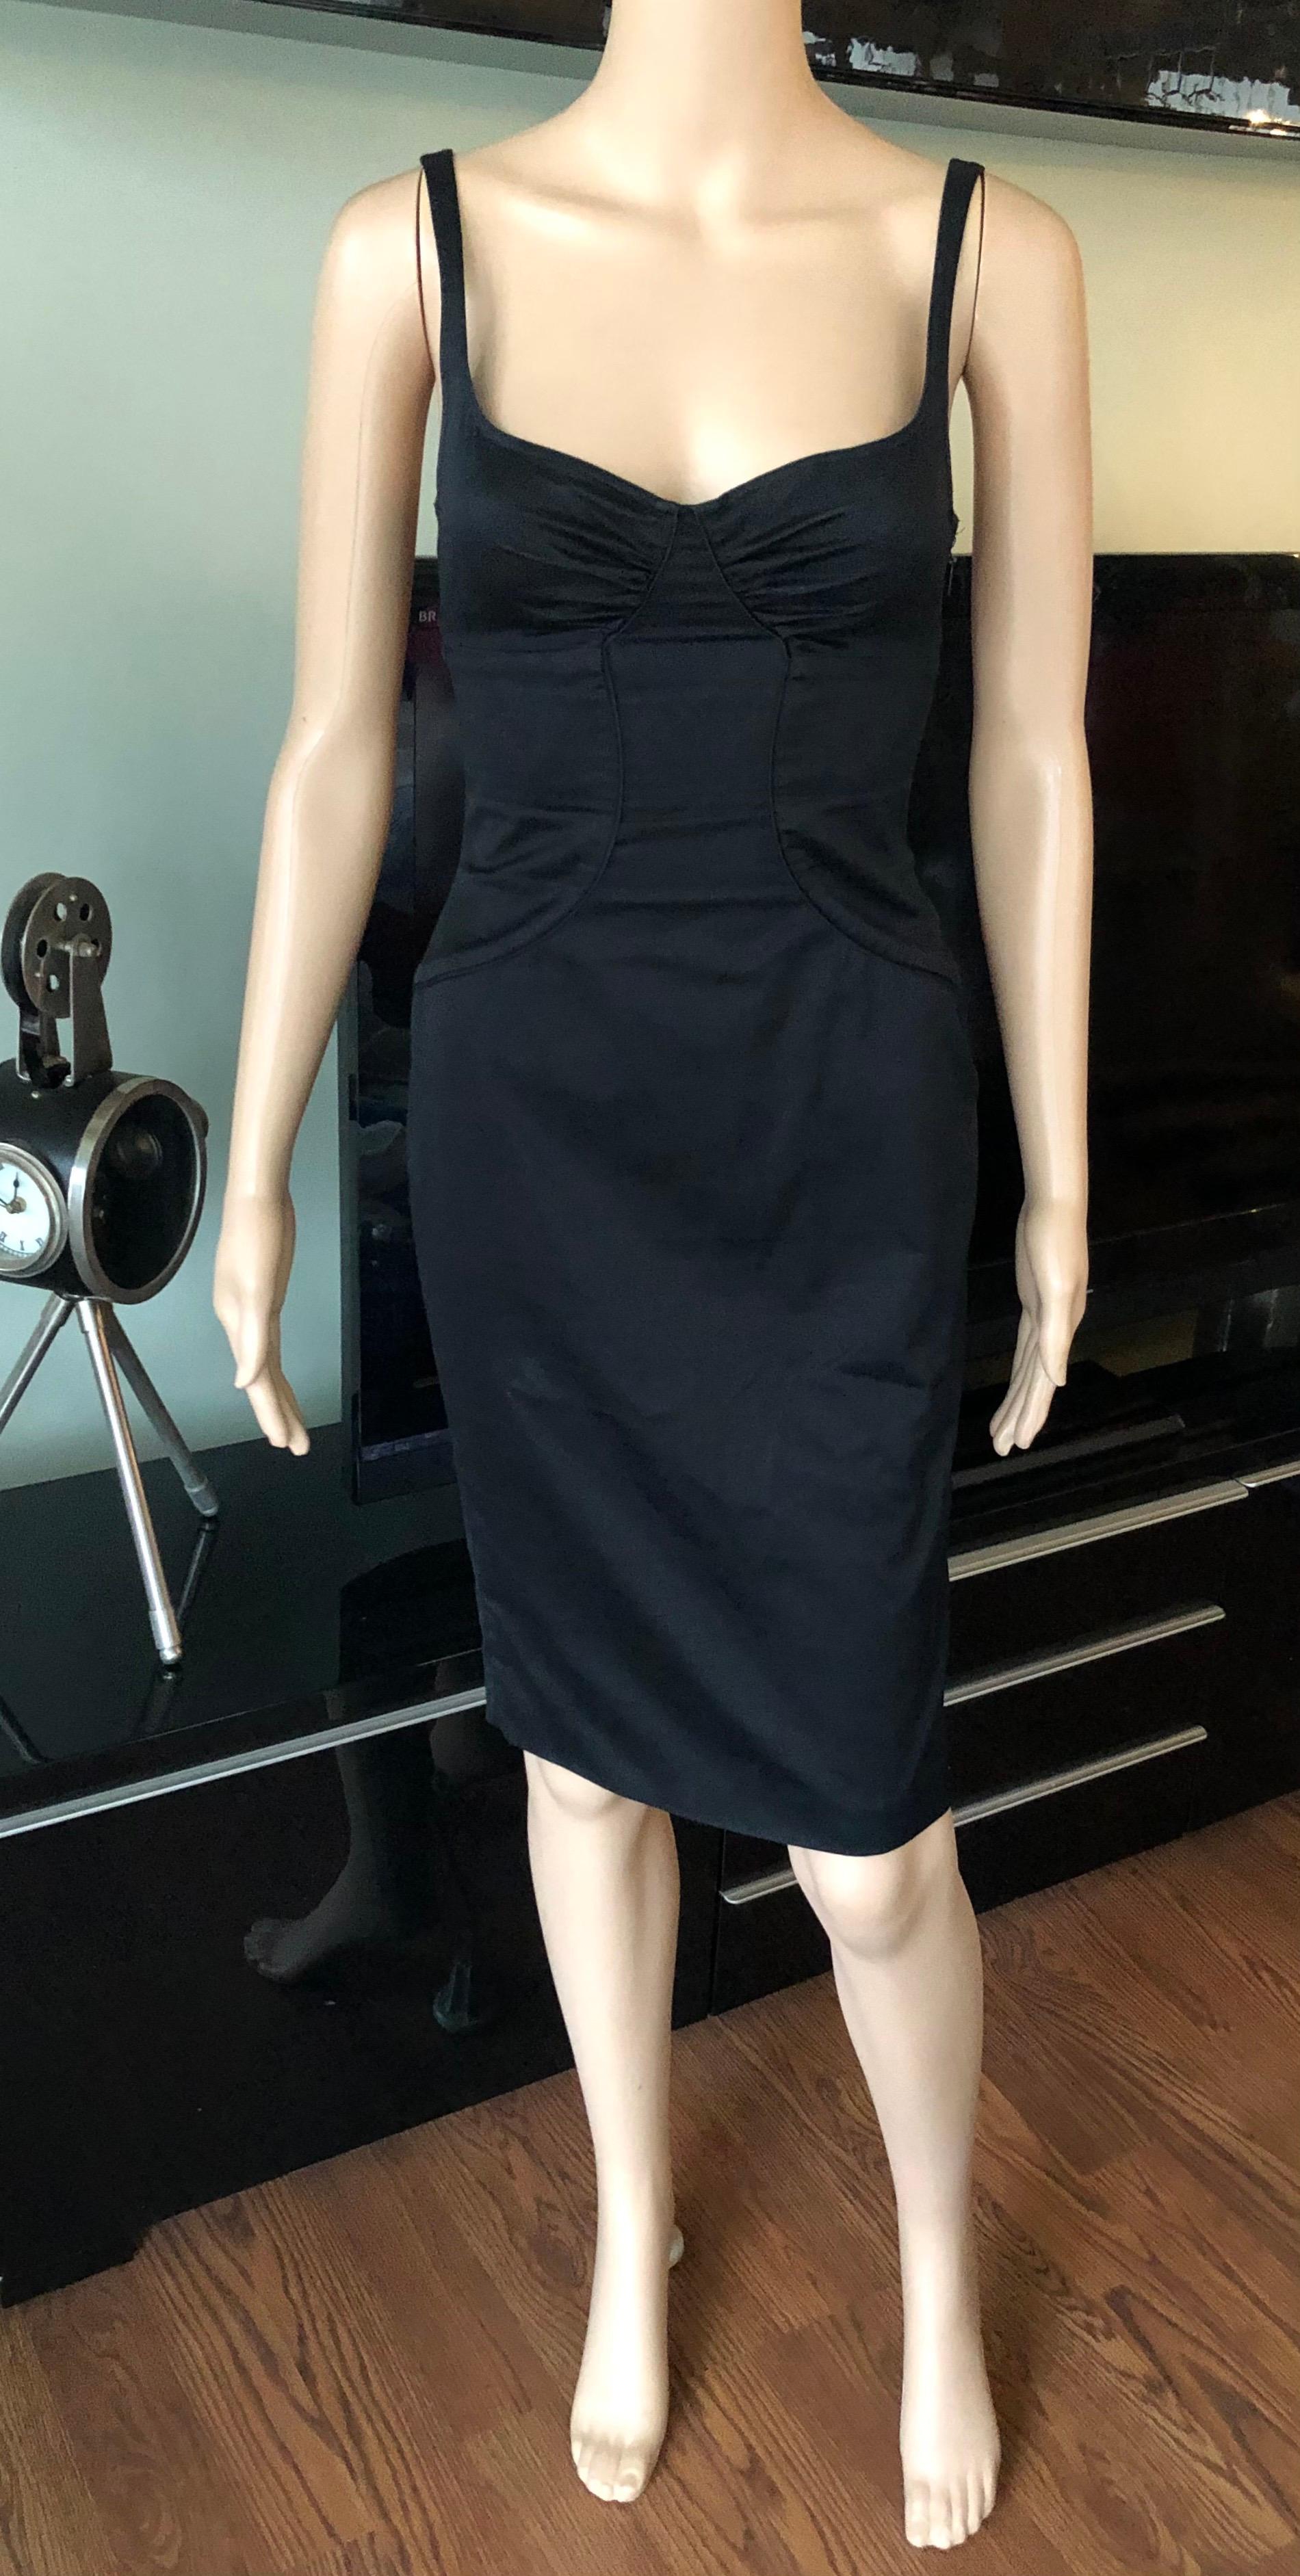 Tom Ford for Gucci 2003 Bustier Cutout Back Black Mini Dress In Good Condition For Sale In Naples, FL